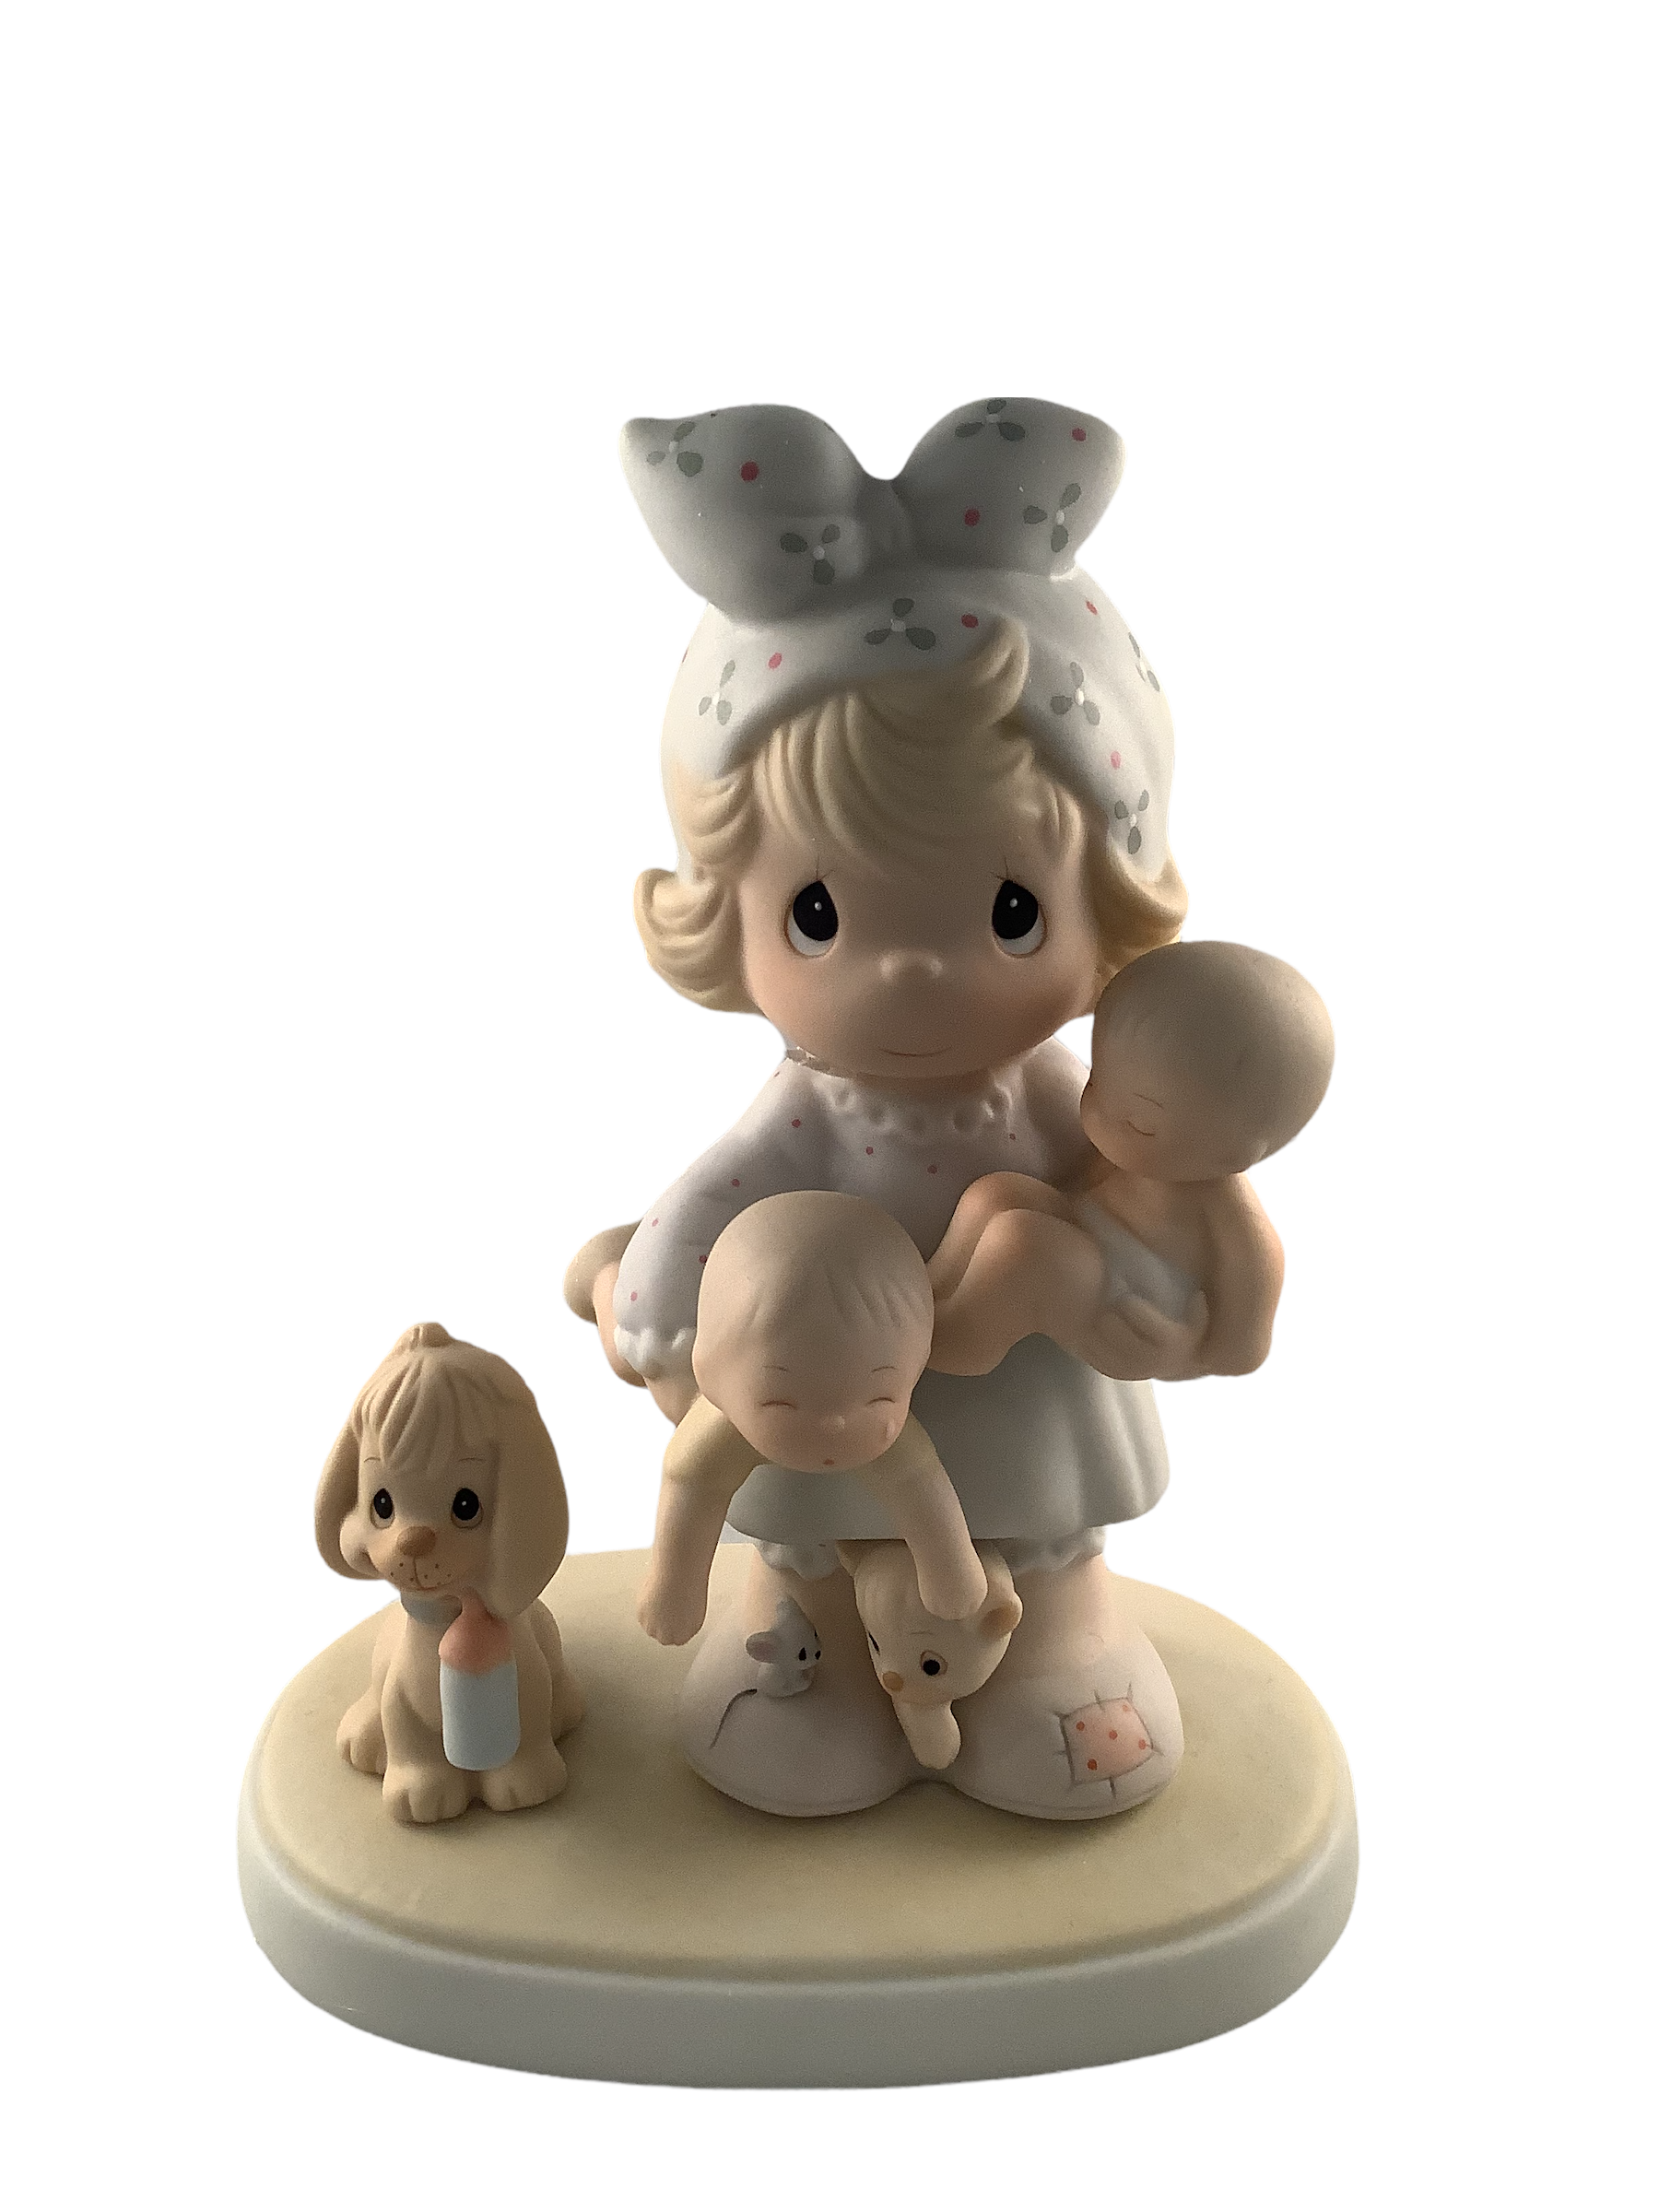 The Joy Of The Lord Is My Strength - Precious Moment Figurine